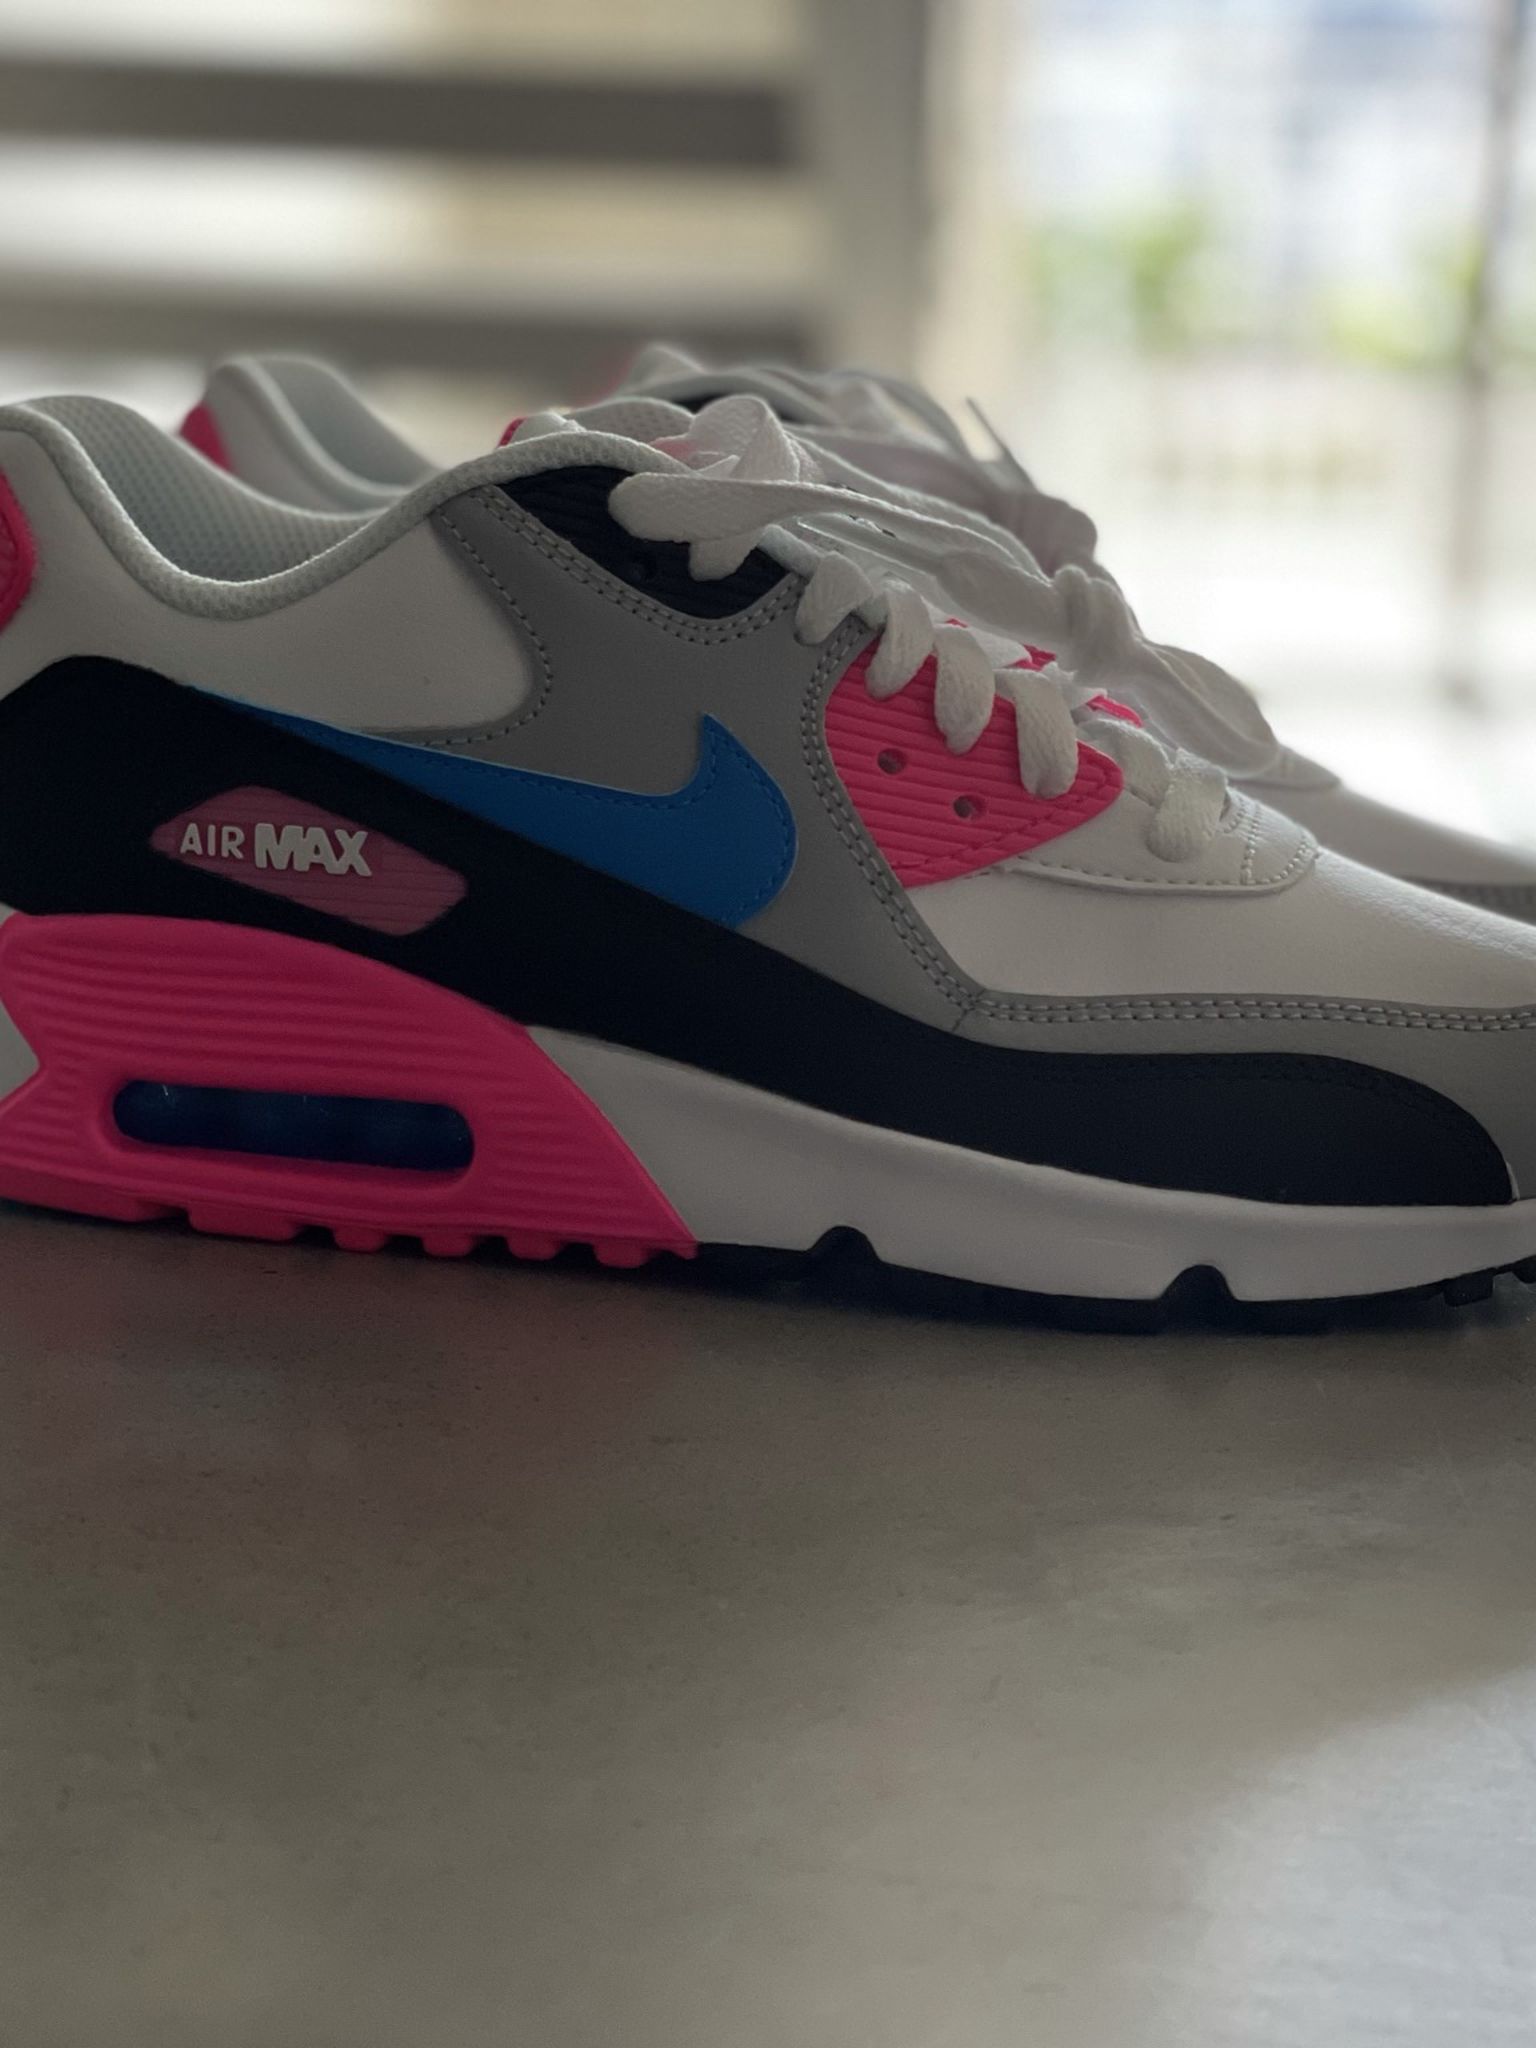 NEW Nike Air Max 90 Leather GS 'White Photo Blue Pink' Sneakers Size 5.5Y/ Women’s Size 7